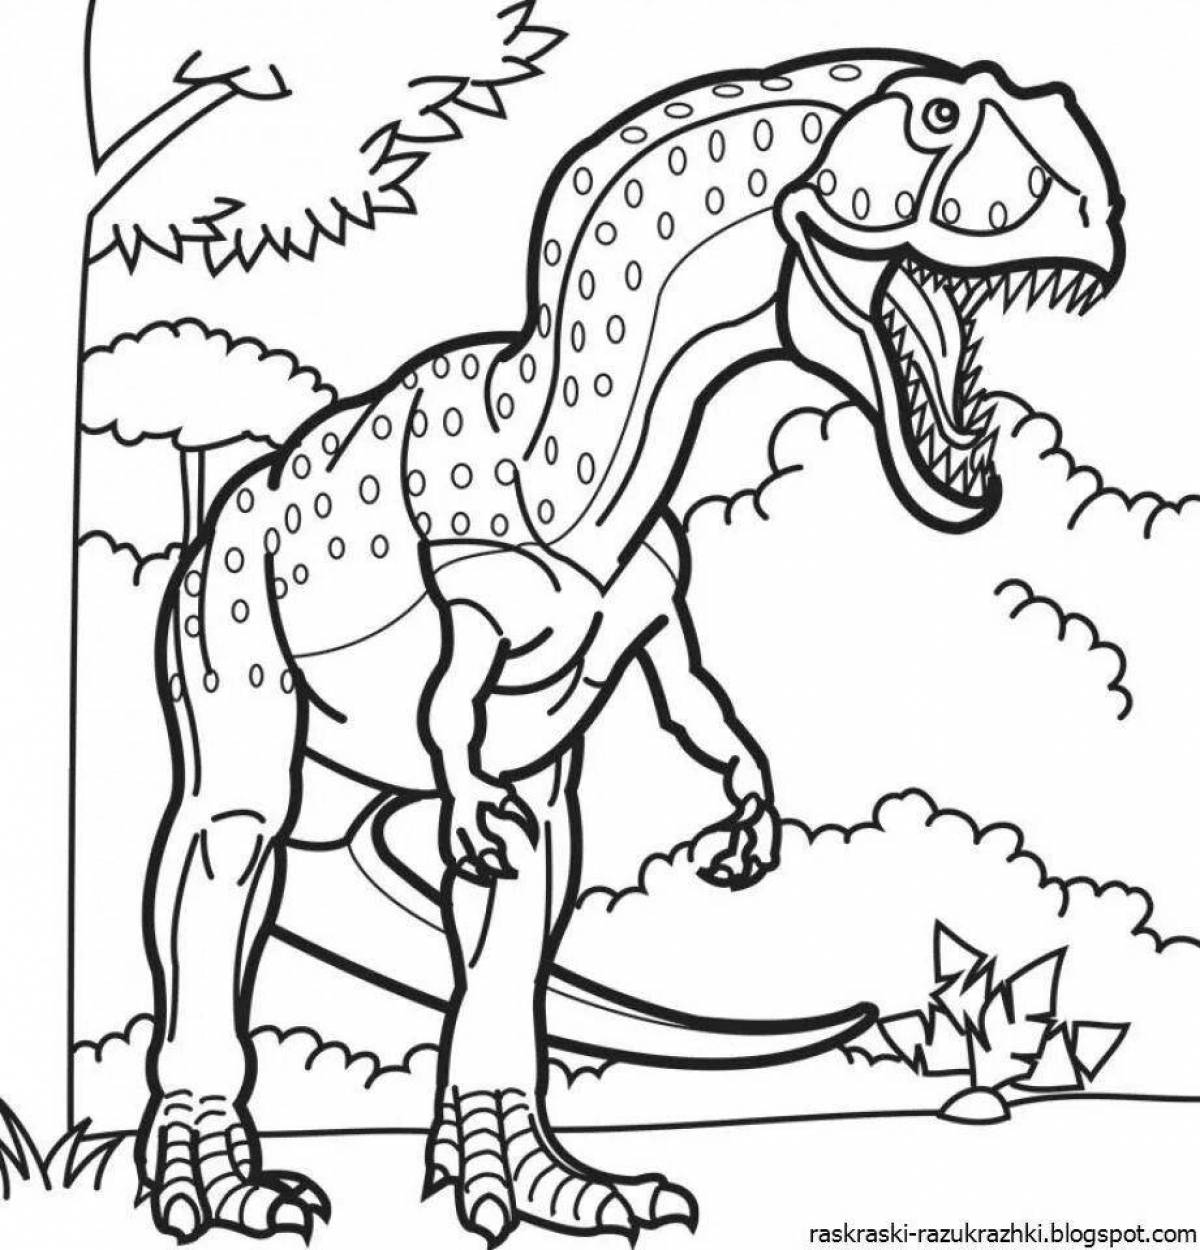 Playful dinosaurs coloring for boys 7 years old